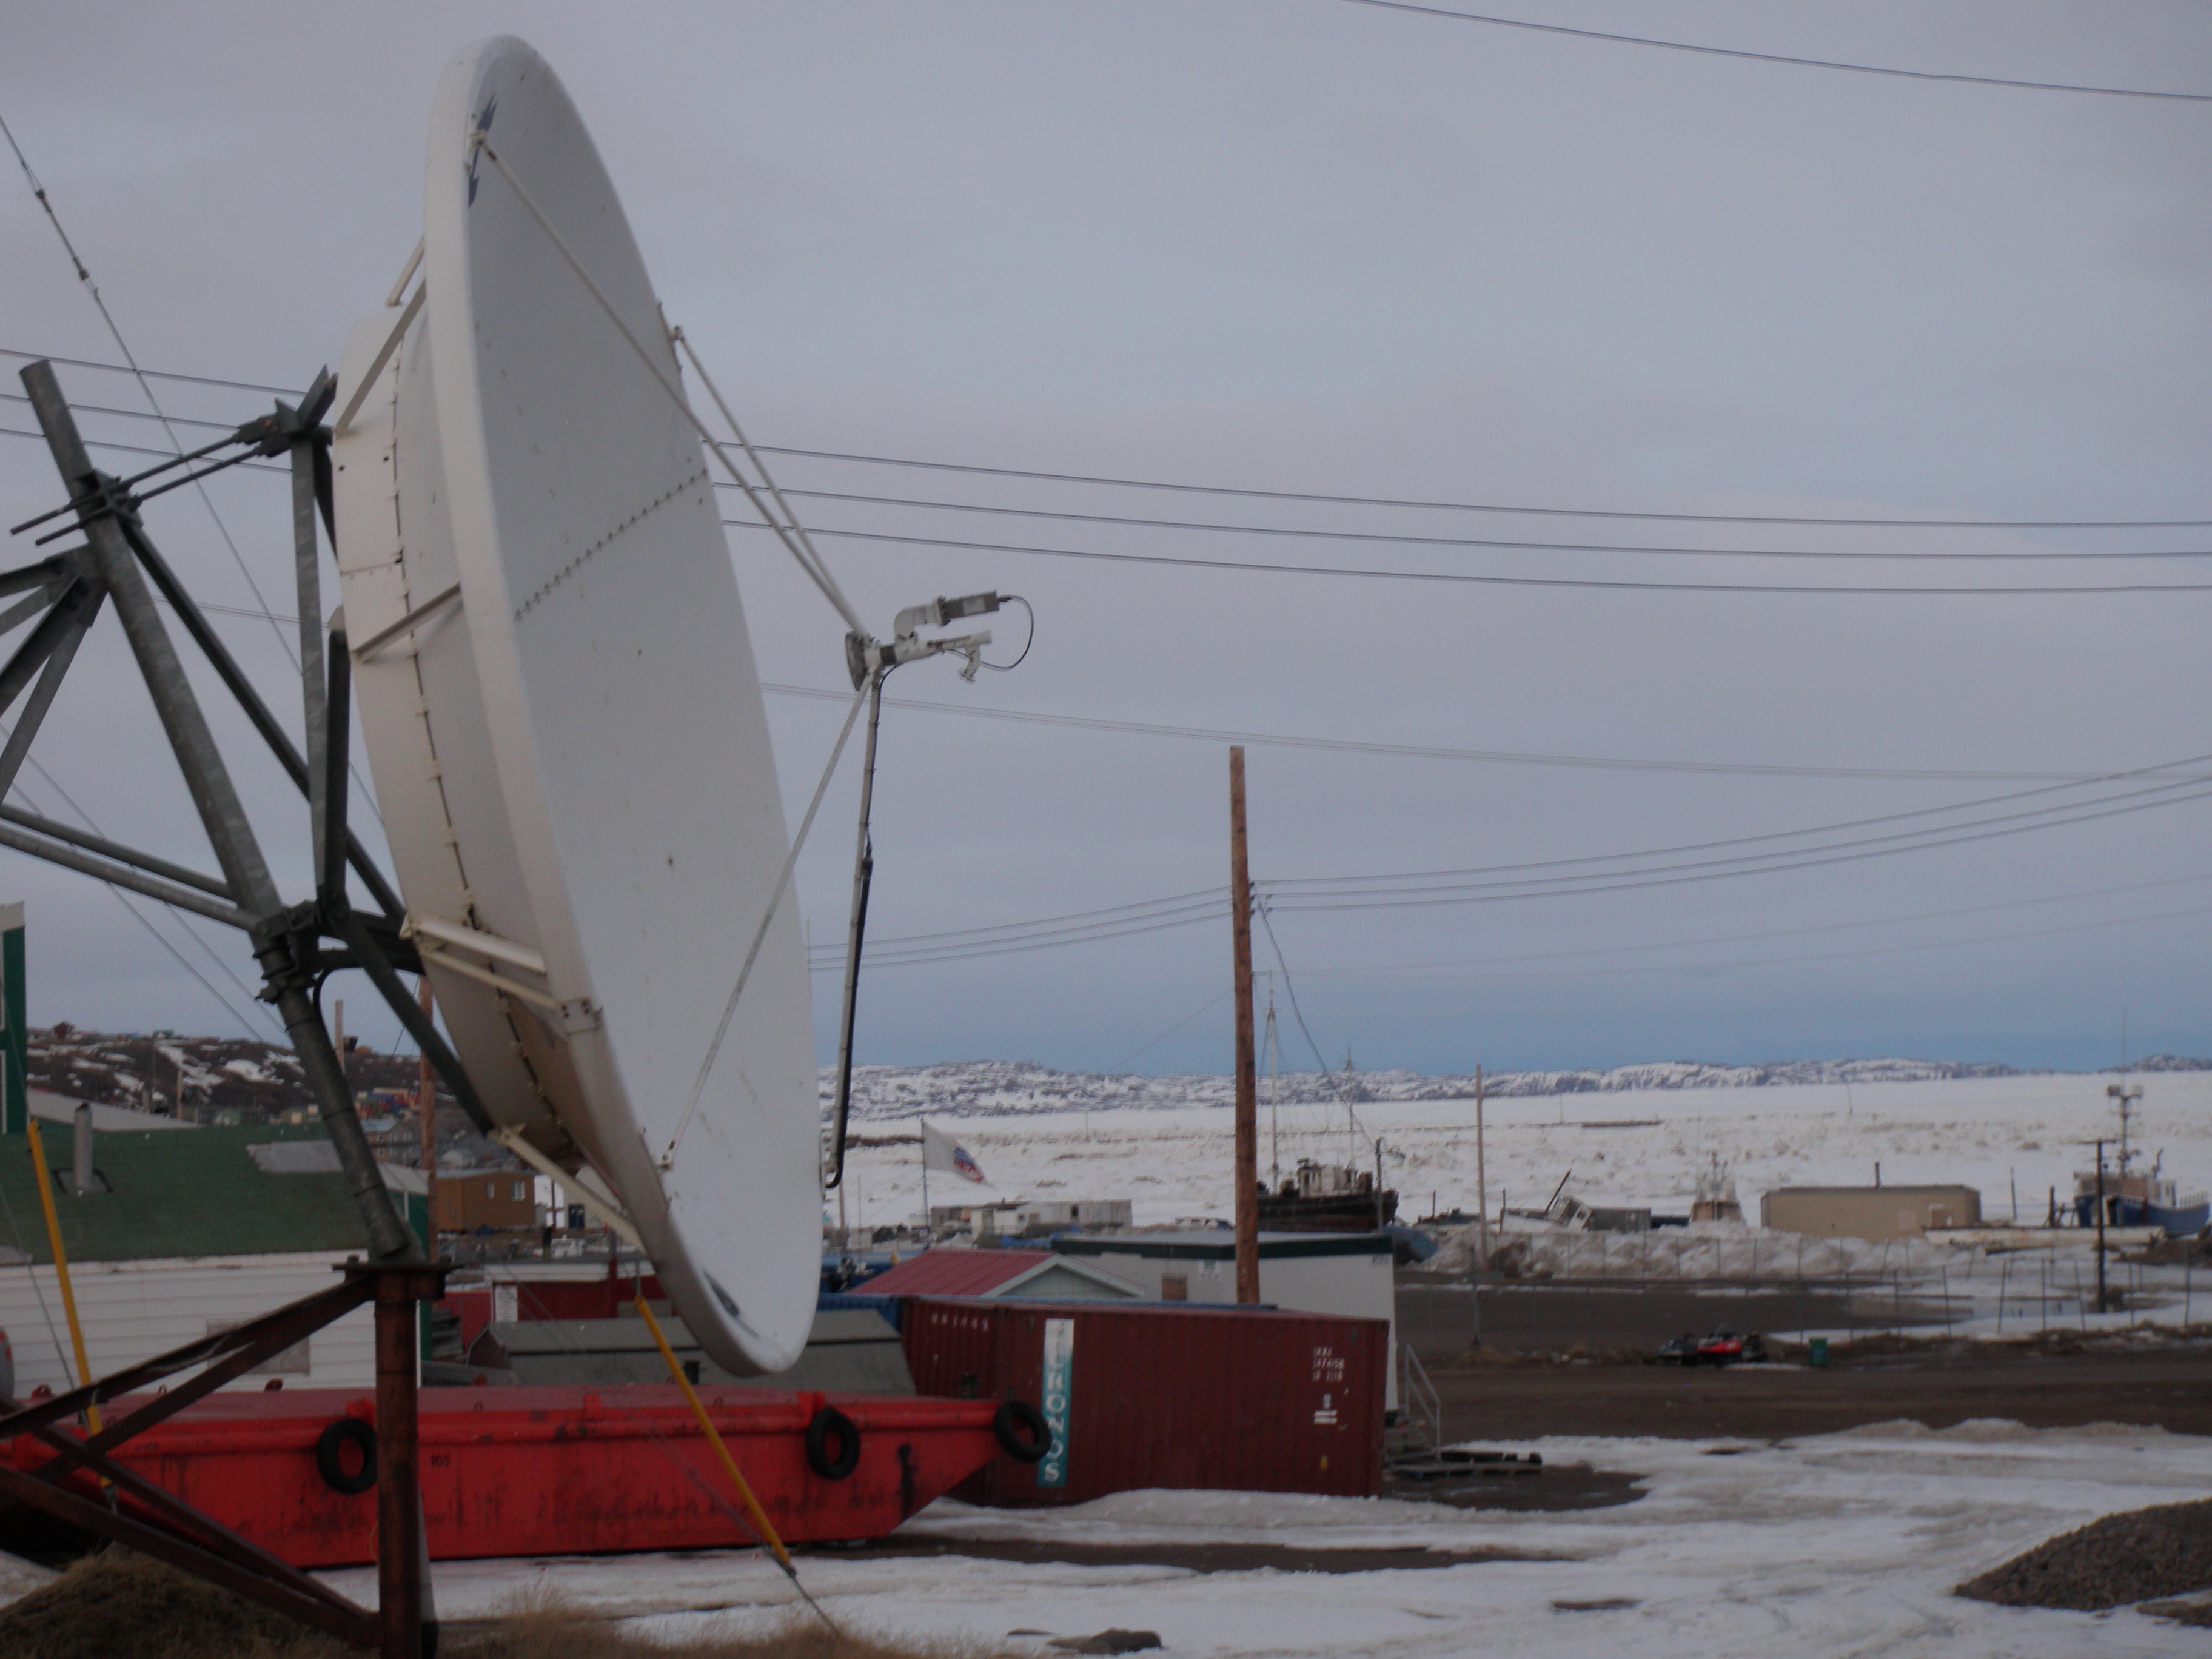 The Canadian Coast Guard Centre in Iqaluit July 2015. Academics recommended more satellite coverage for the Arctic to improve Canada's surveillance capabilities at a Nov 24 standing committee meeting in Ottawa. (Brian Pehora)